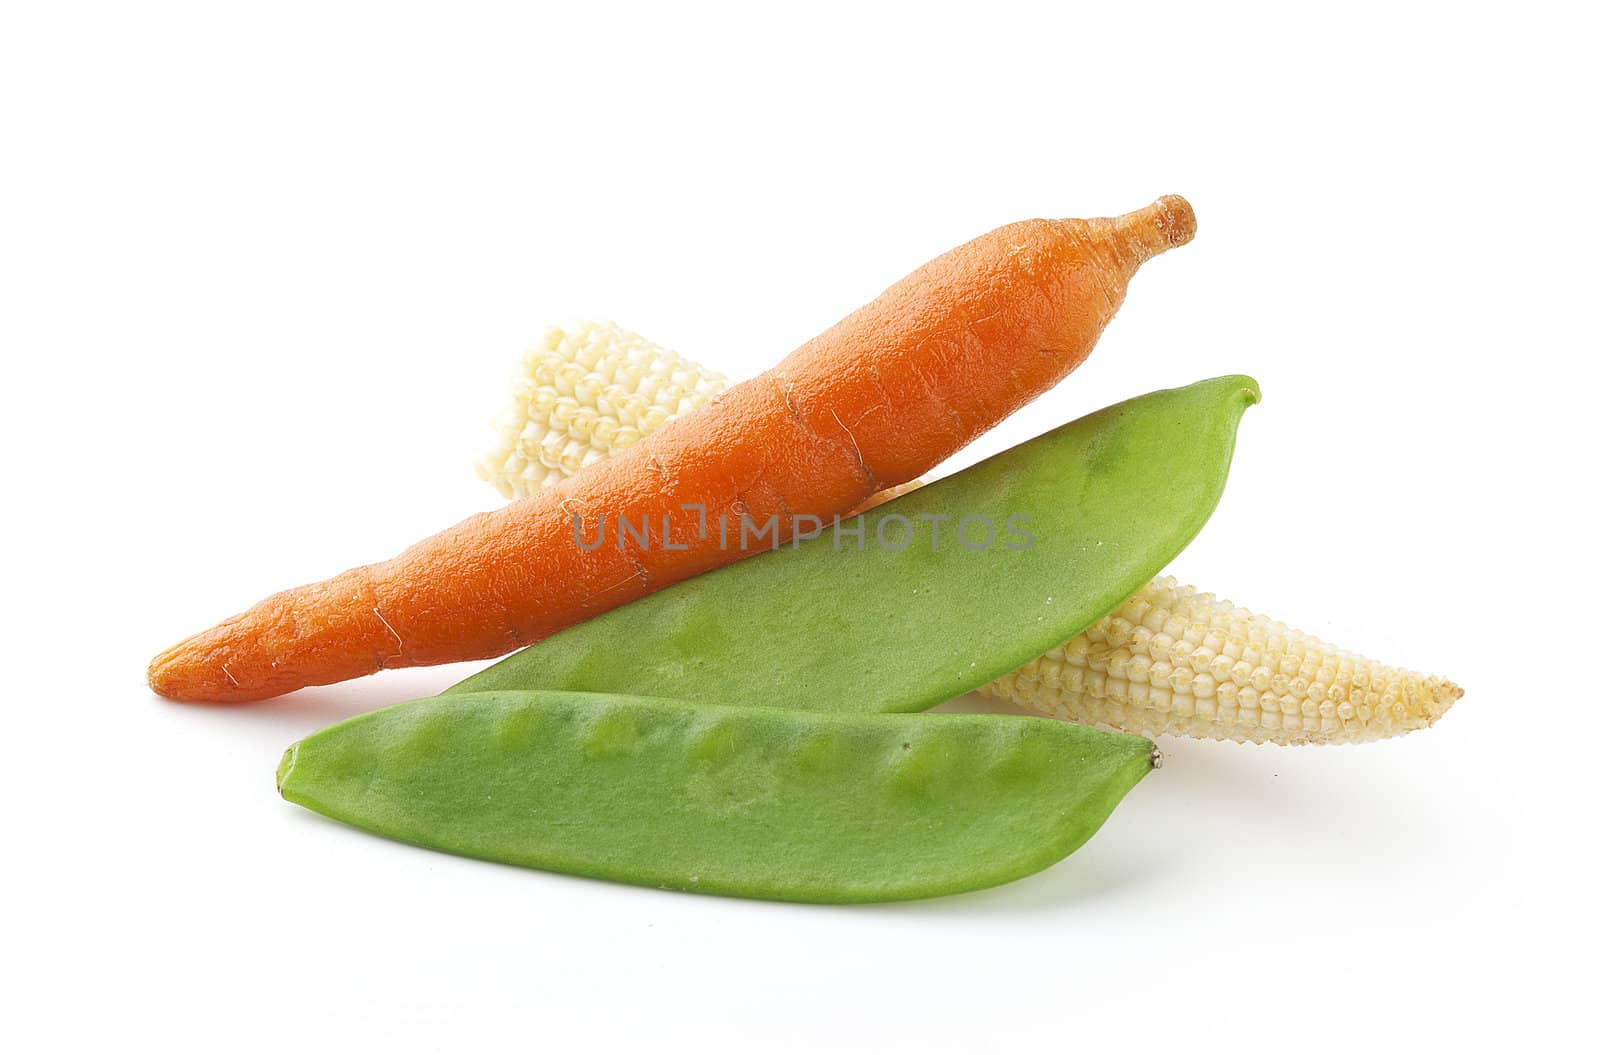 Corn, carrot and green peas on the white background